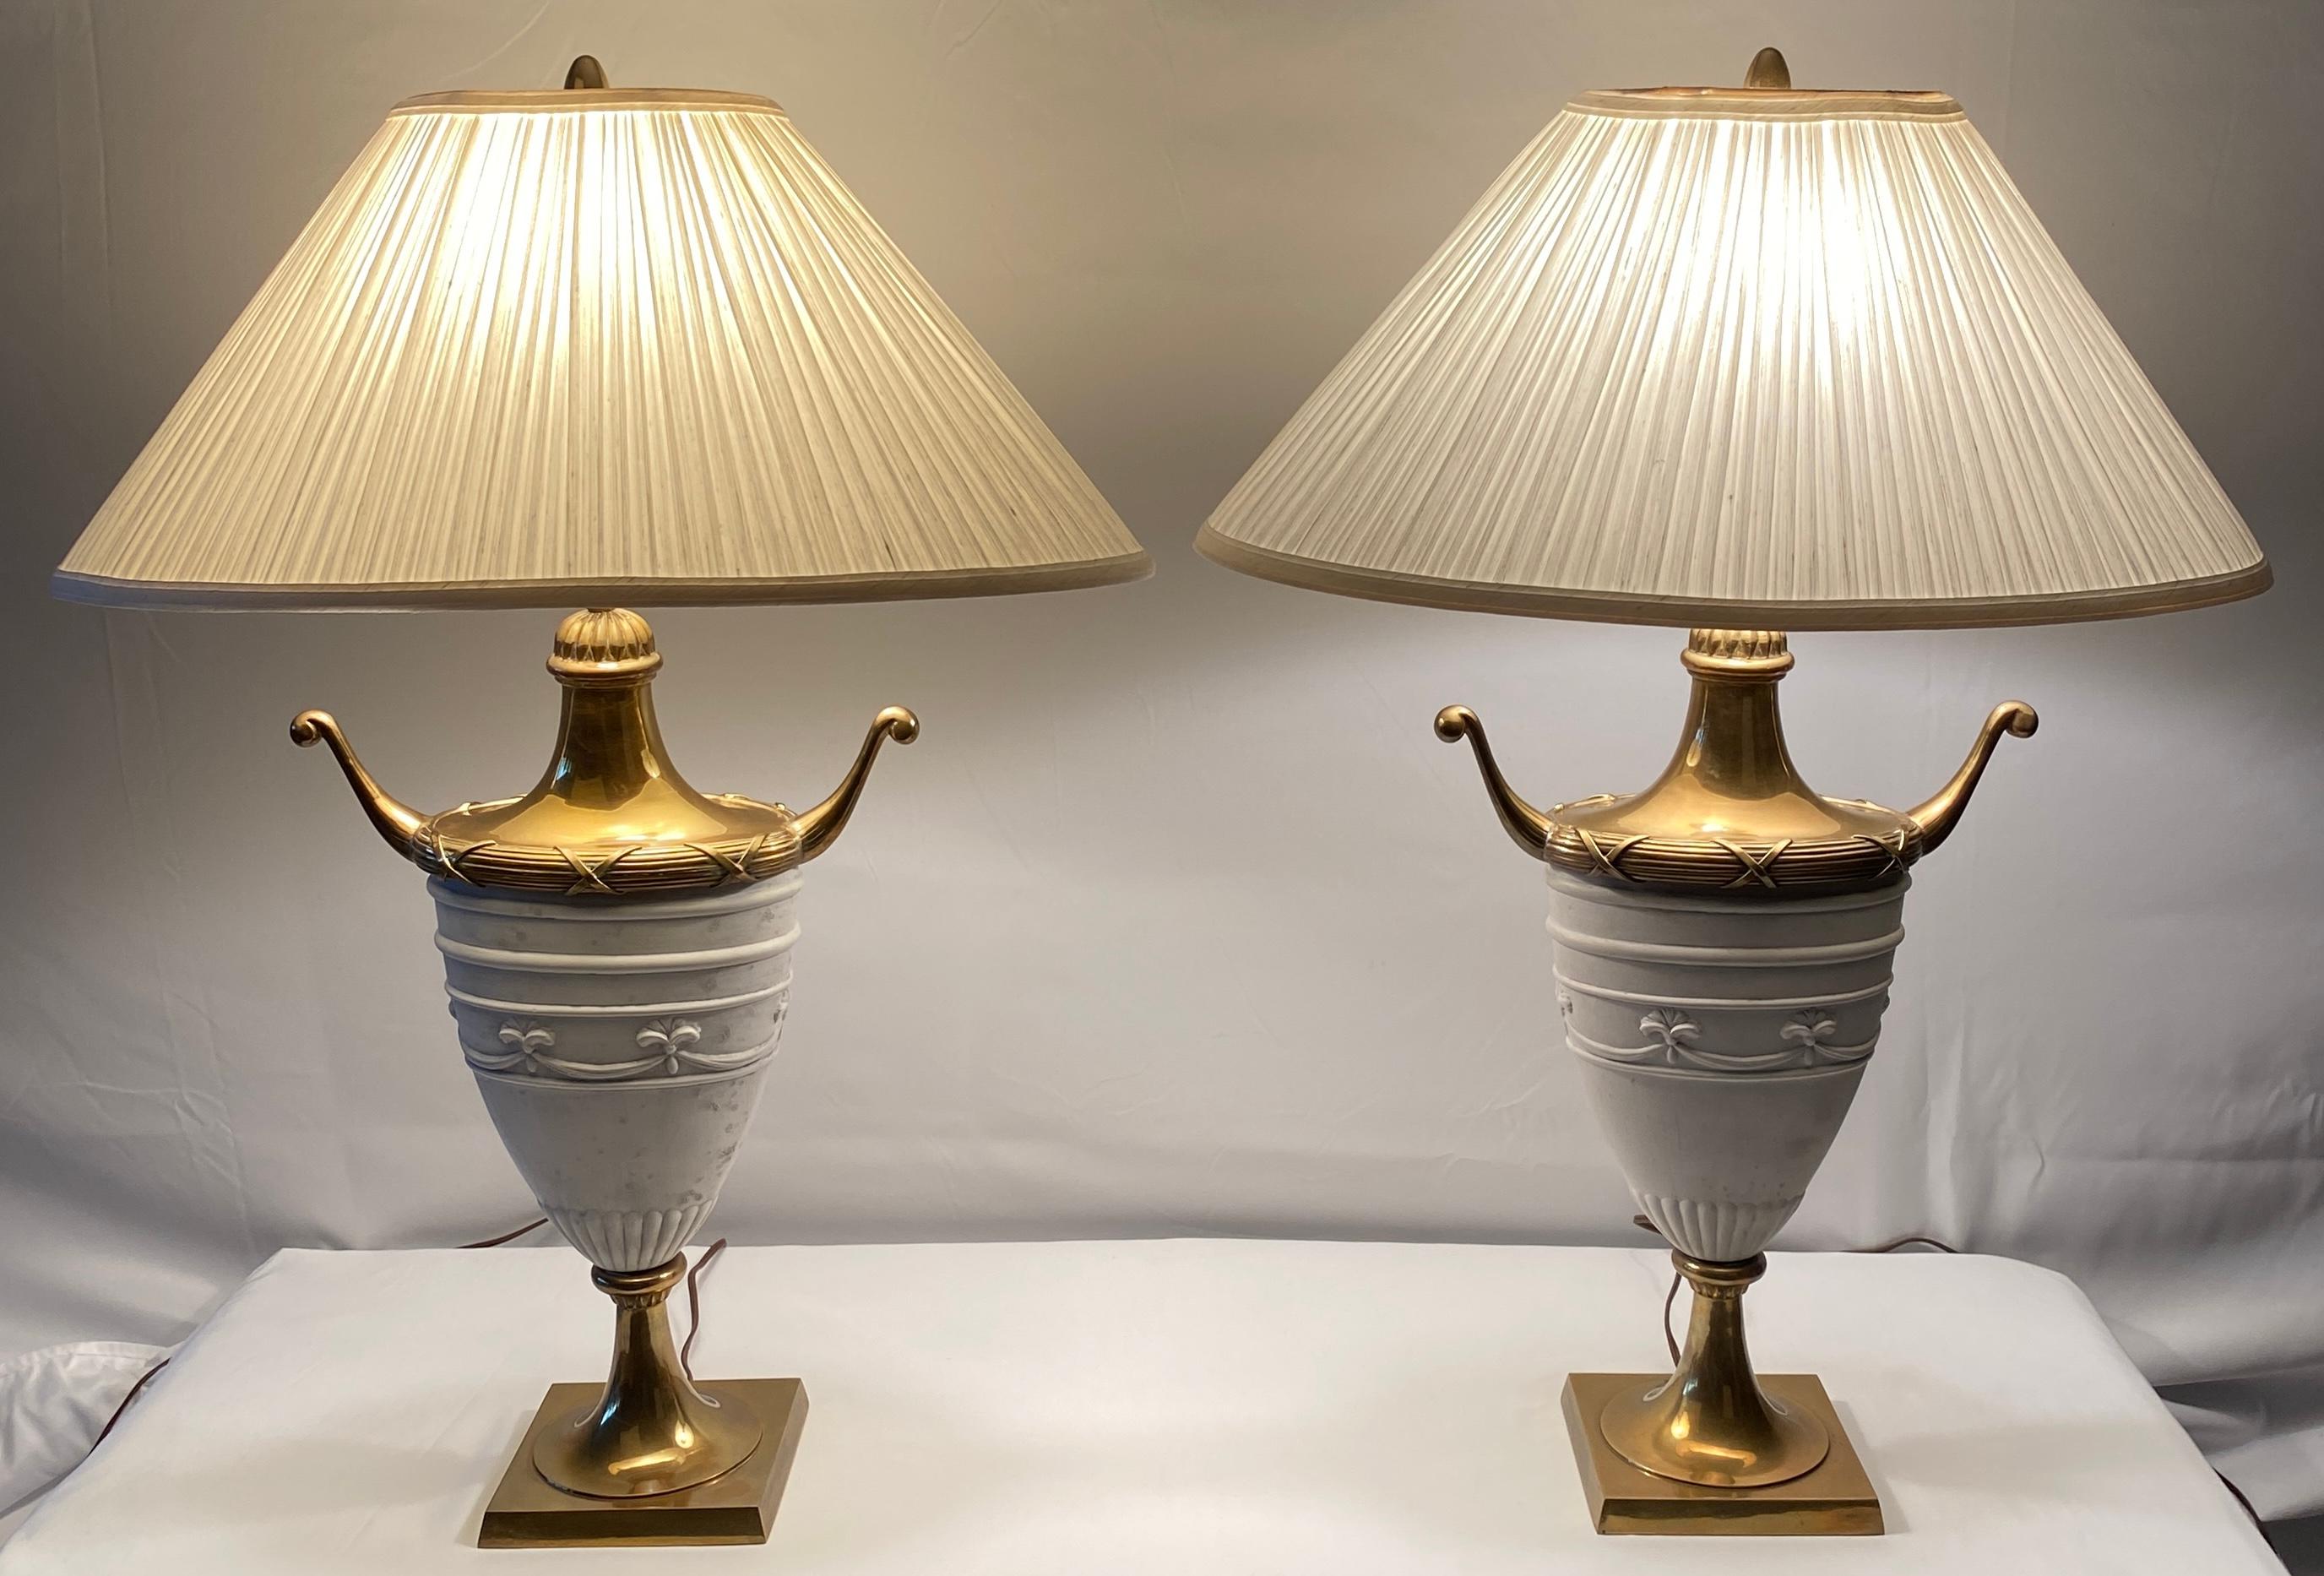 Very decorative pair of white ceramic urn shaped table lamps. These stylish ceramic table lamps would enhance any side tables, night stands, credenza or consoles in a living room, dining area, bedroom or home offer. Made in Italy, wired for use in